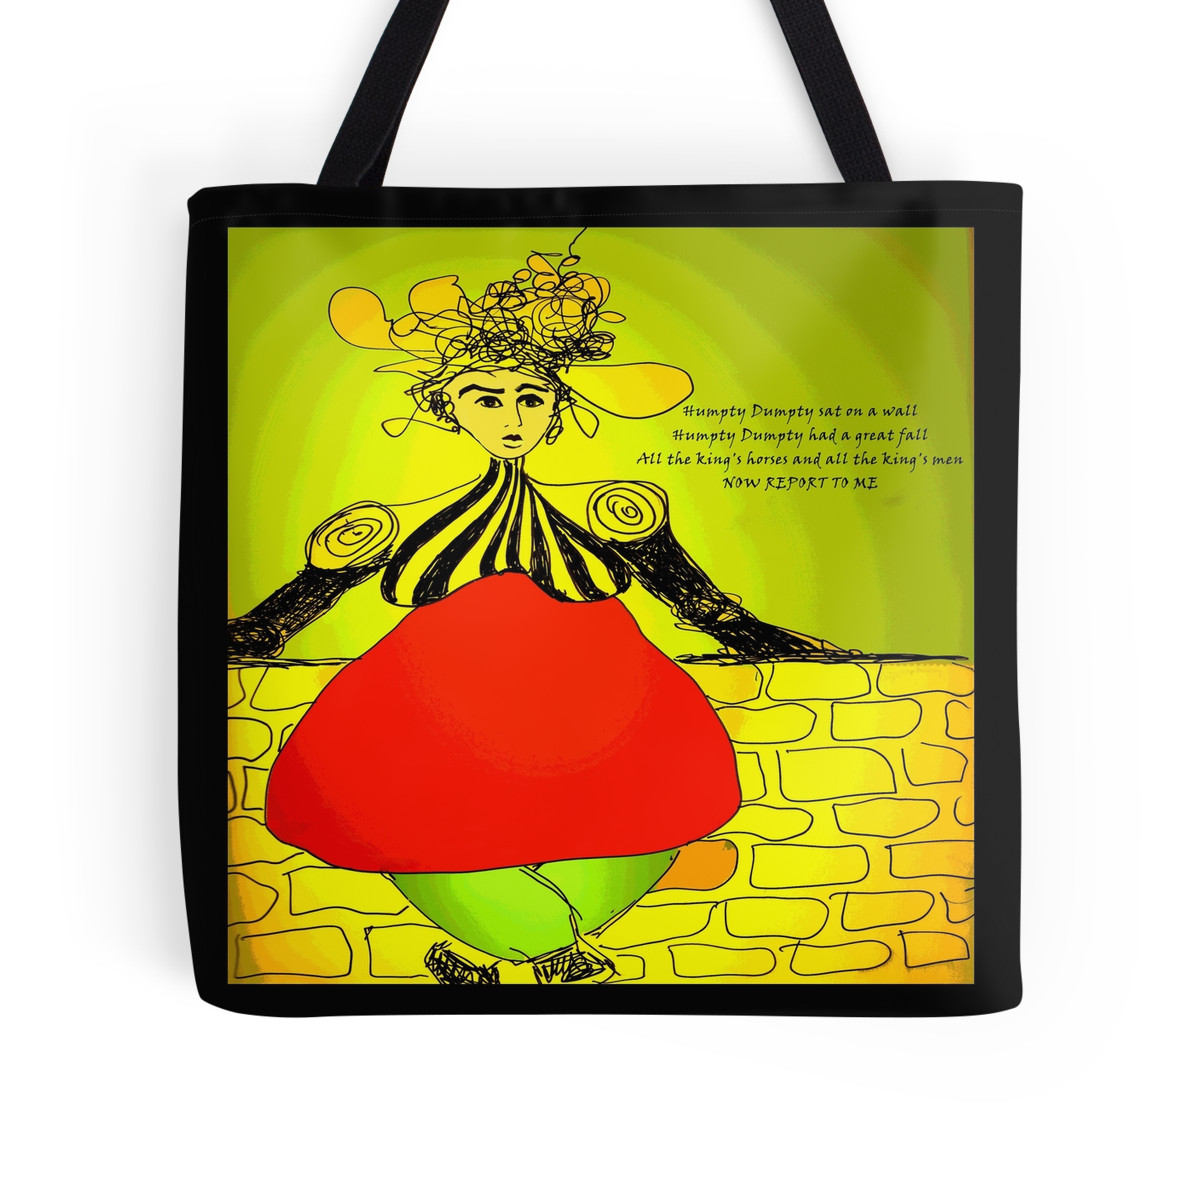 Humpty Dumpty Tote Bag by Sarah Curtiss